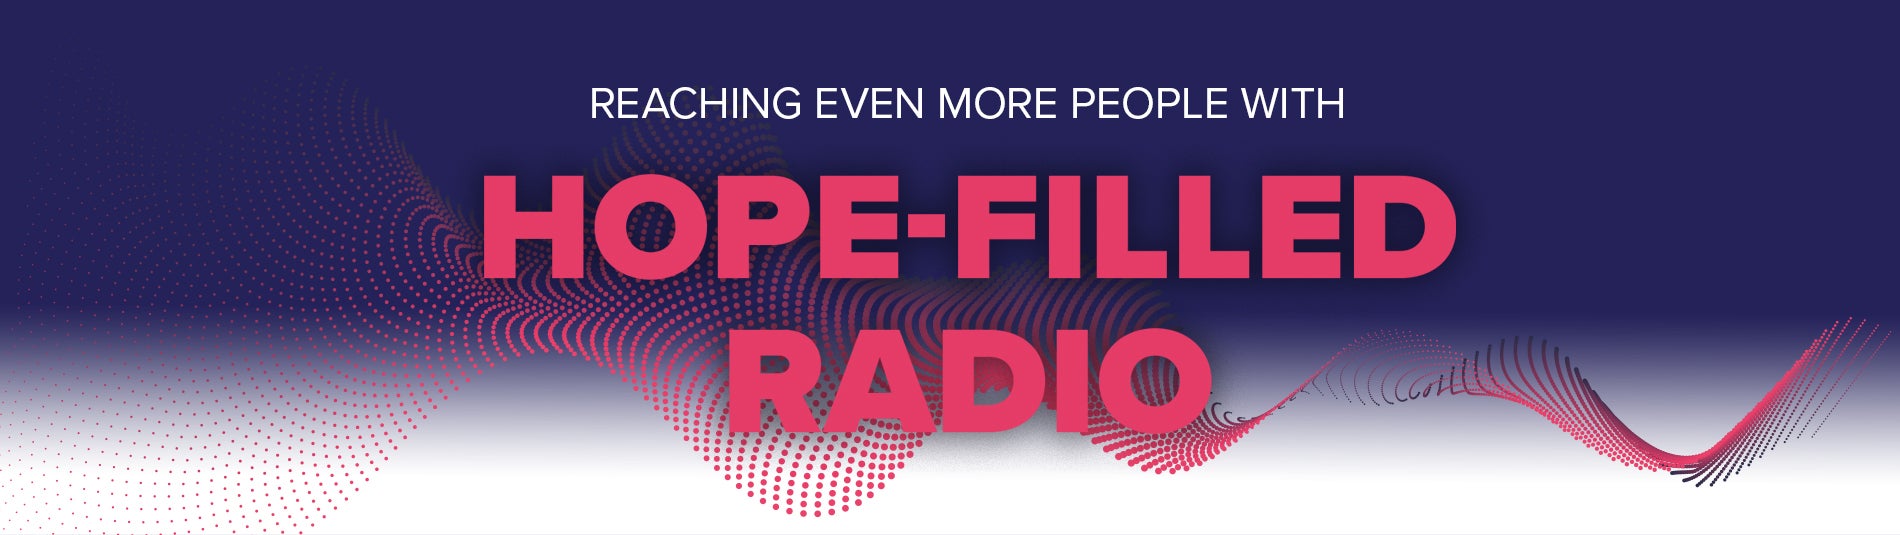 Reaching even more people with hope-filled radio